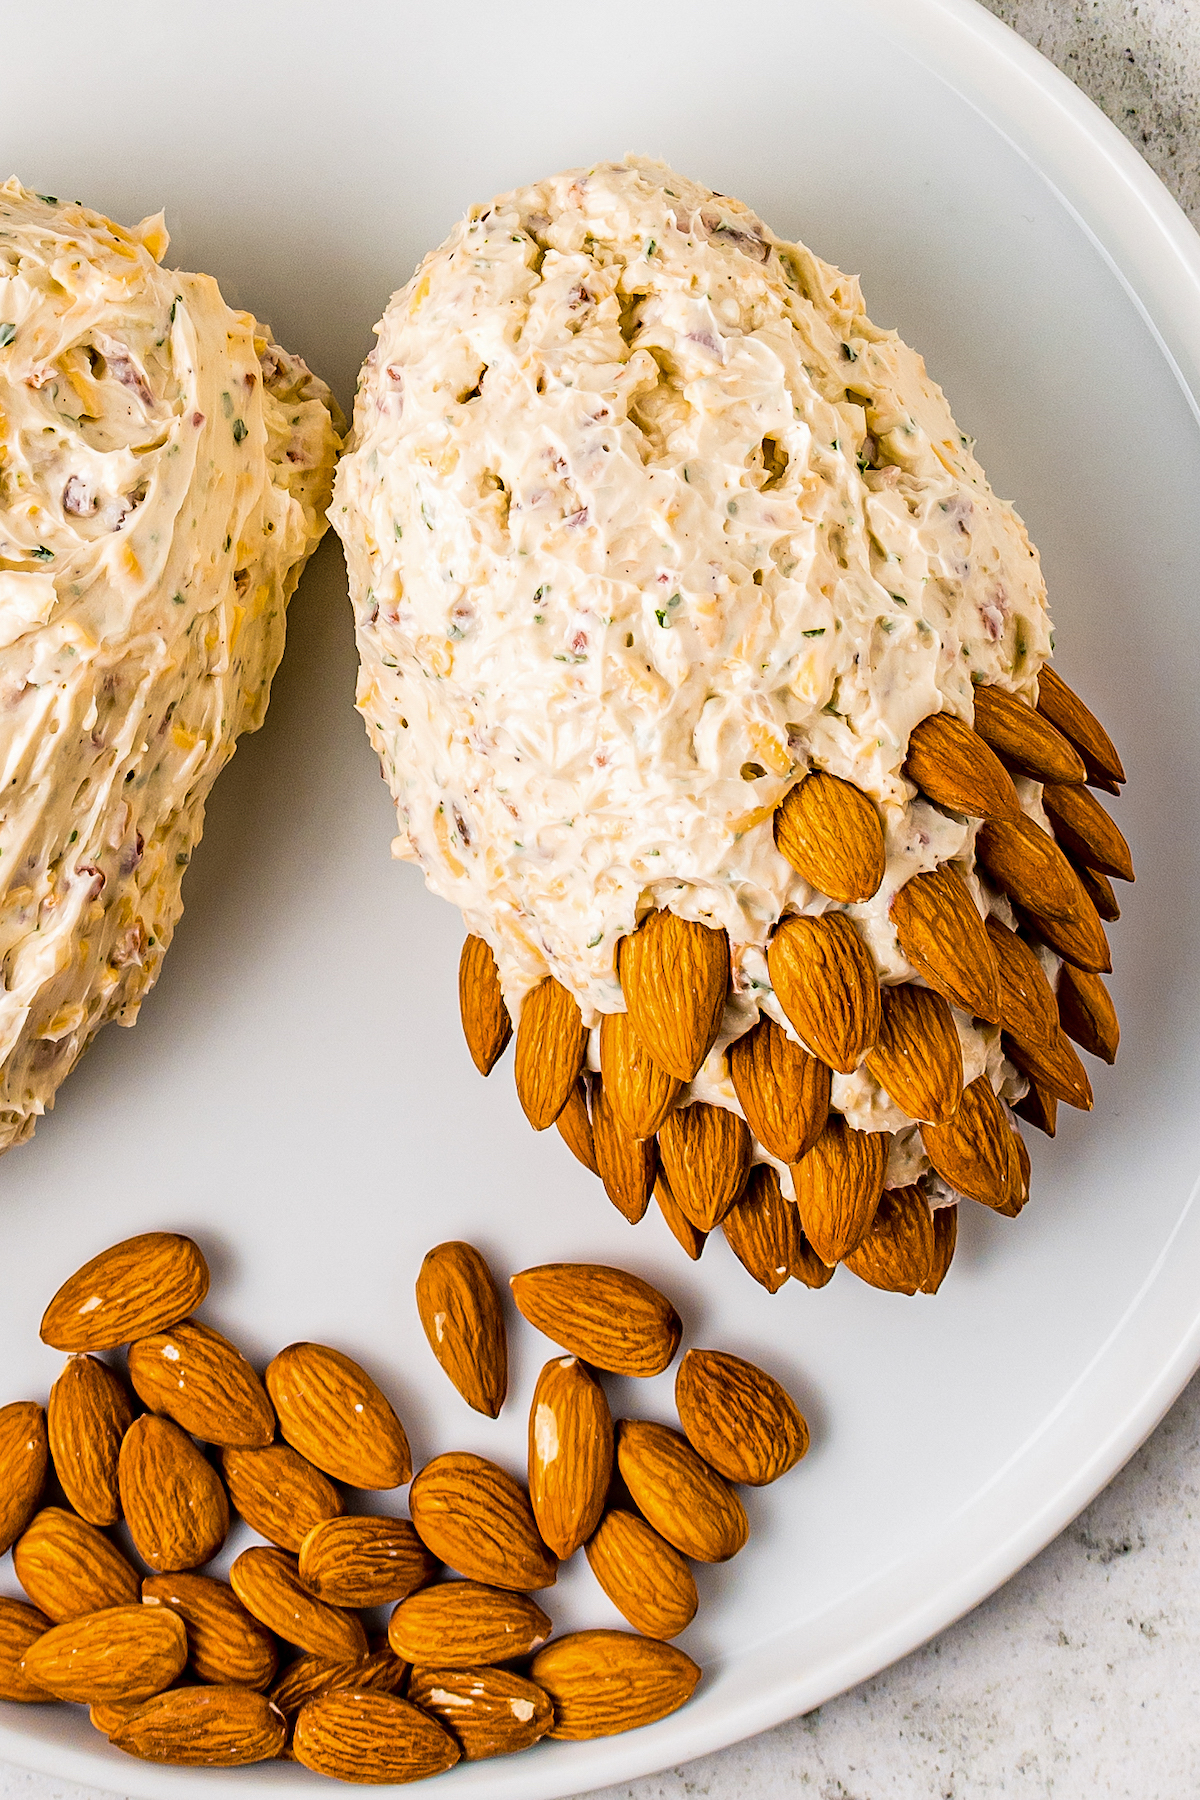 Almonds pressed into a cheese ball, with the pointed ends of the almonds sticking out.